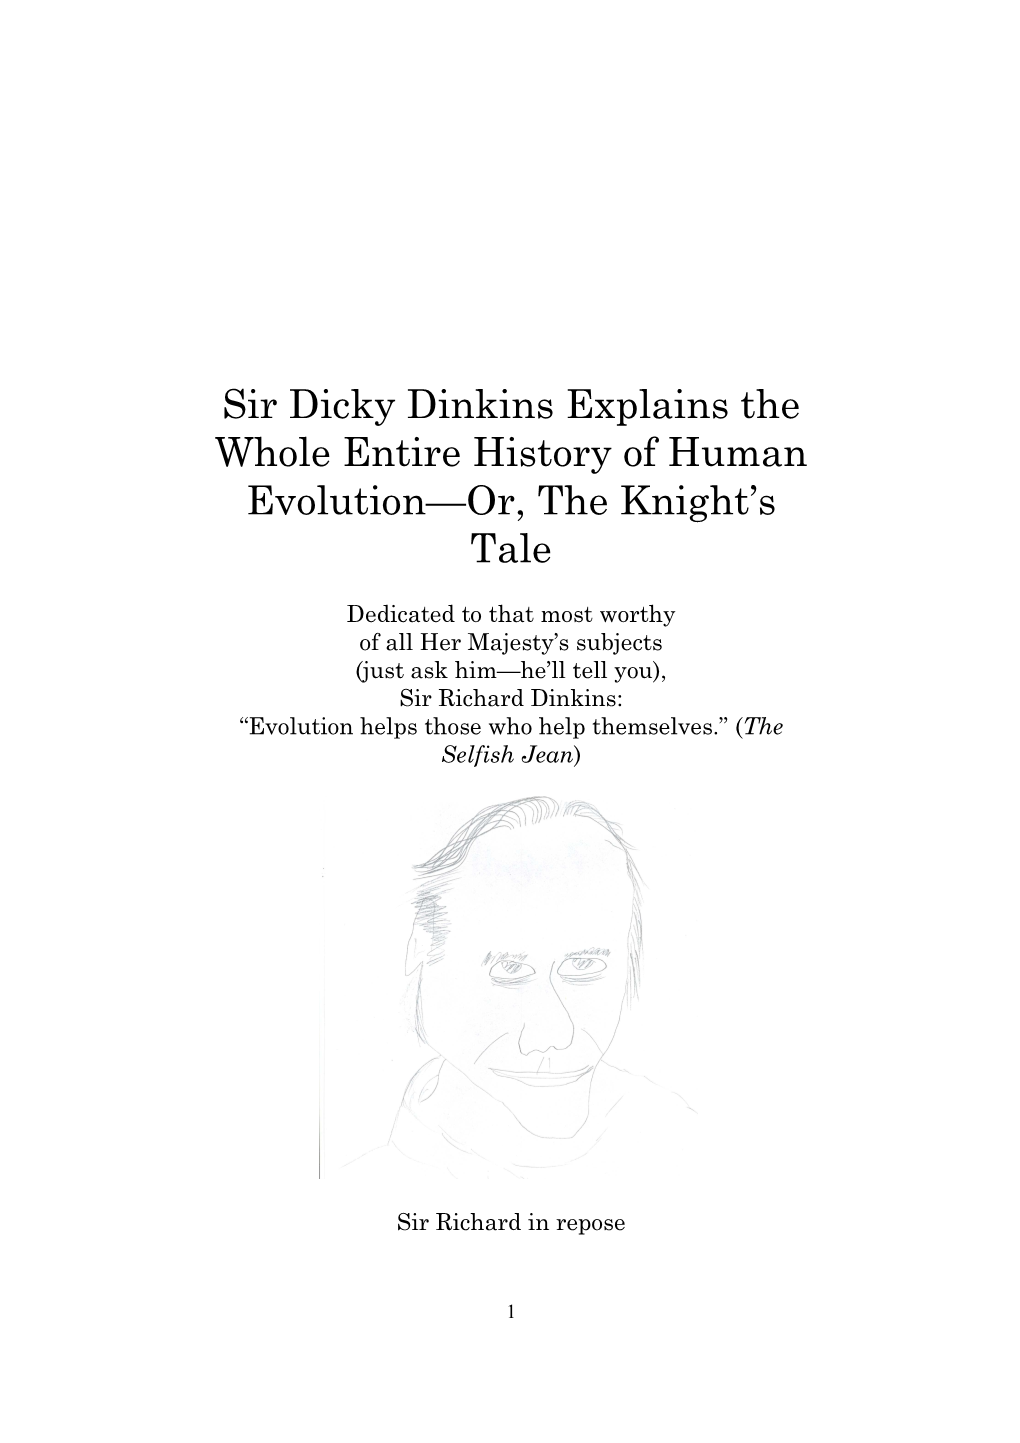 Sir Dicky Dinkins Explains the Whole Entire History of Human Evolution—Or, the Knight’S Tale